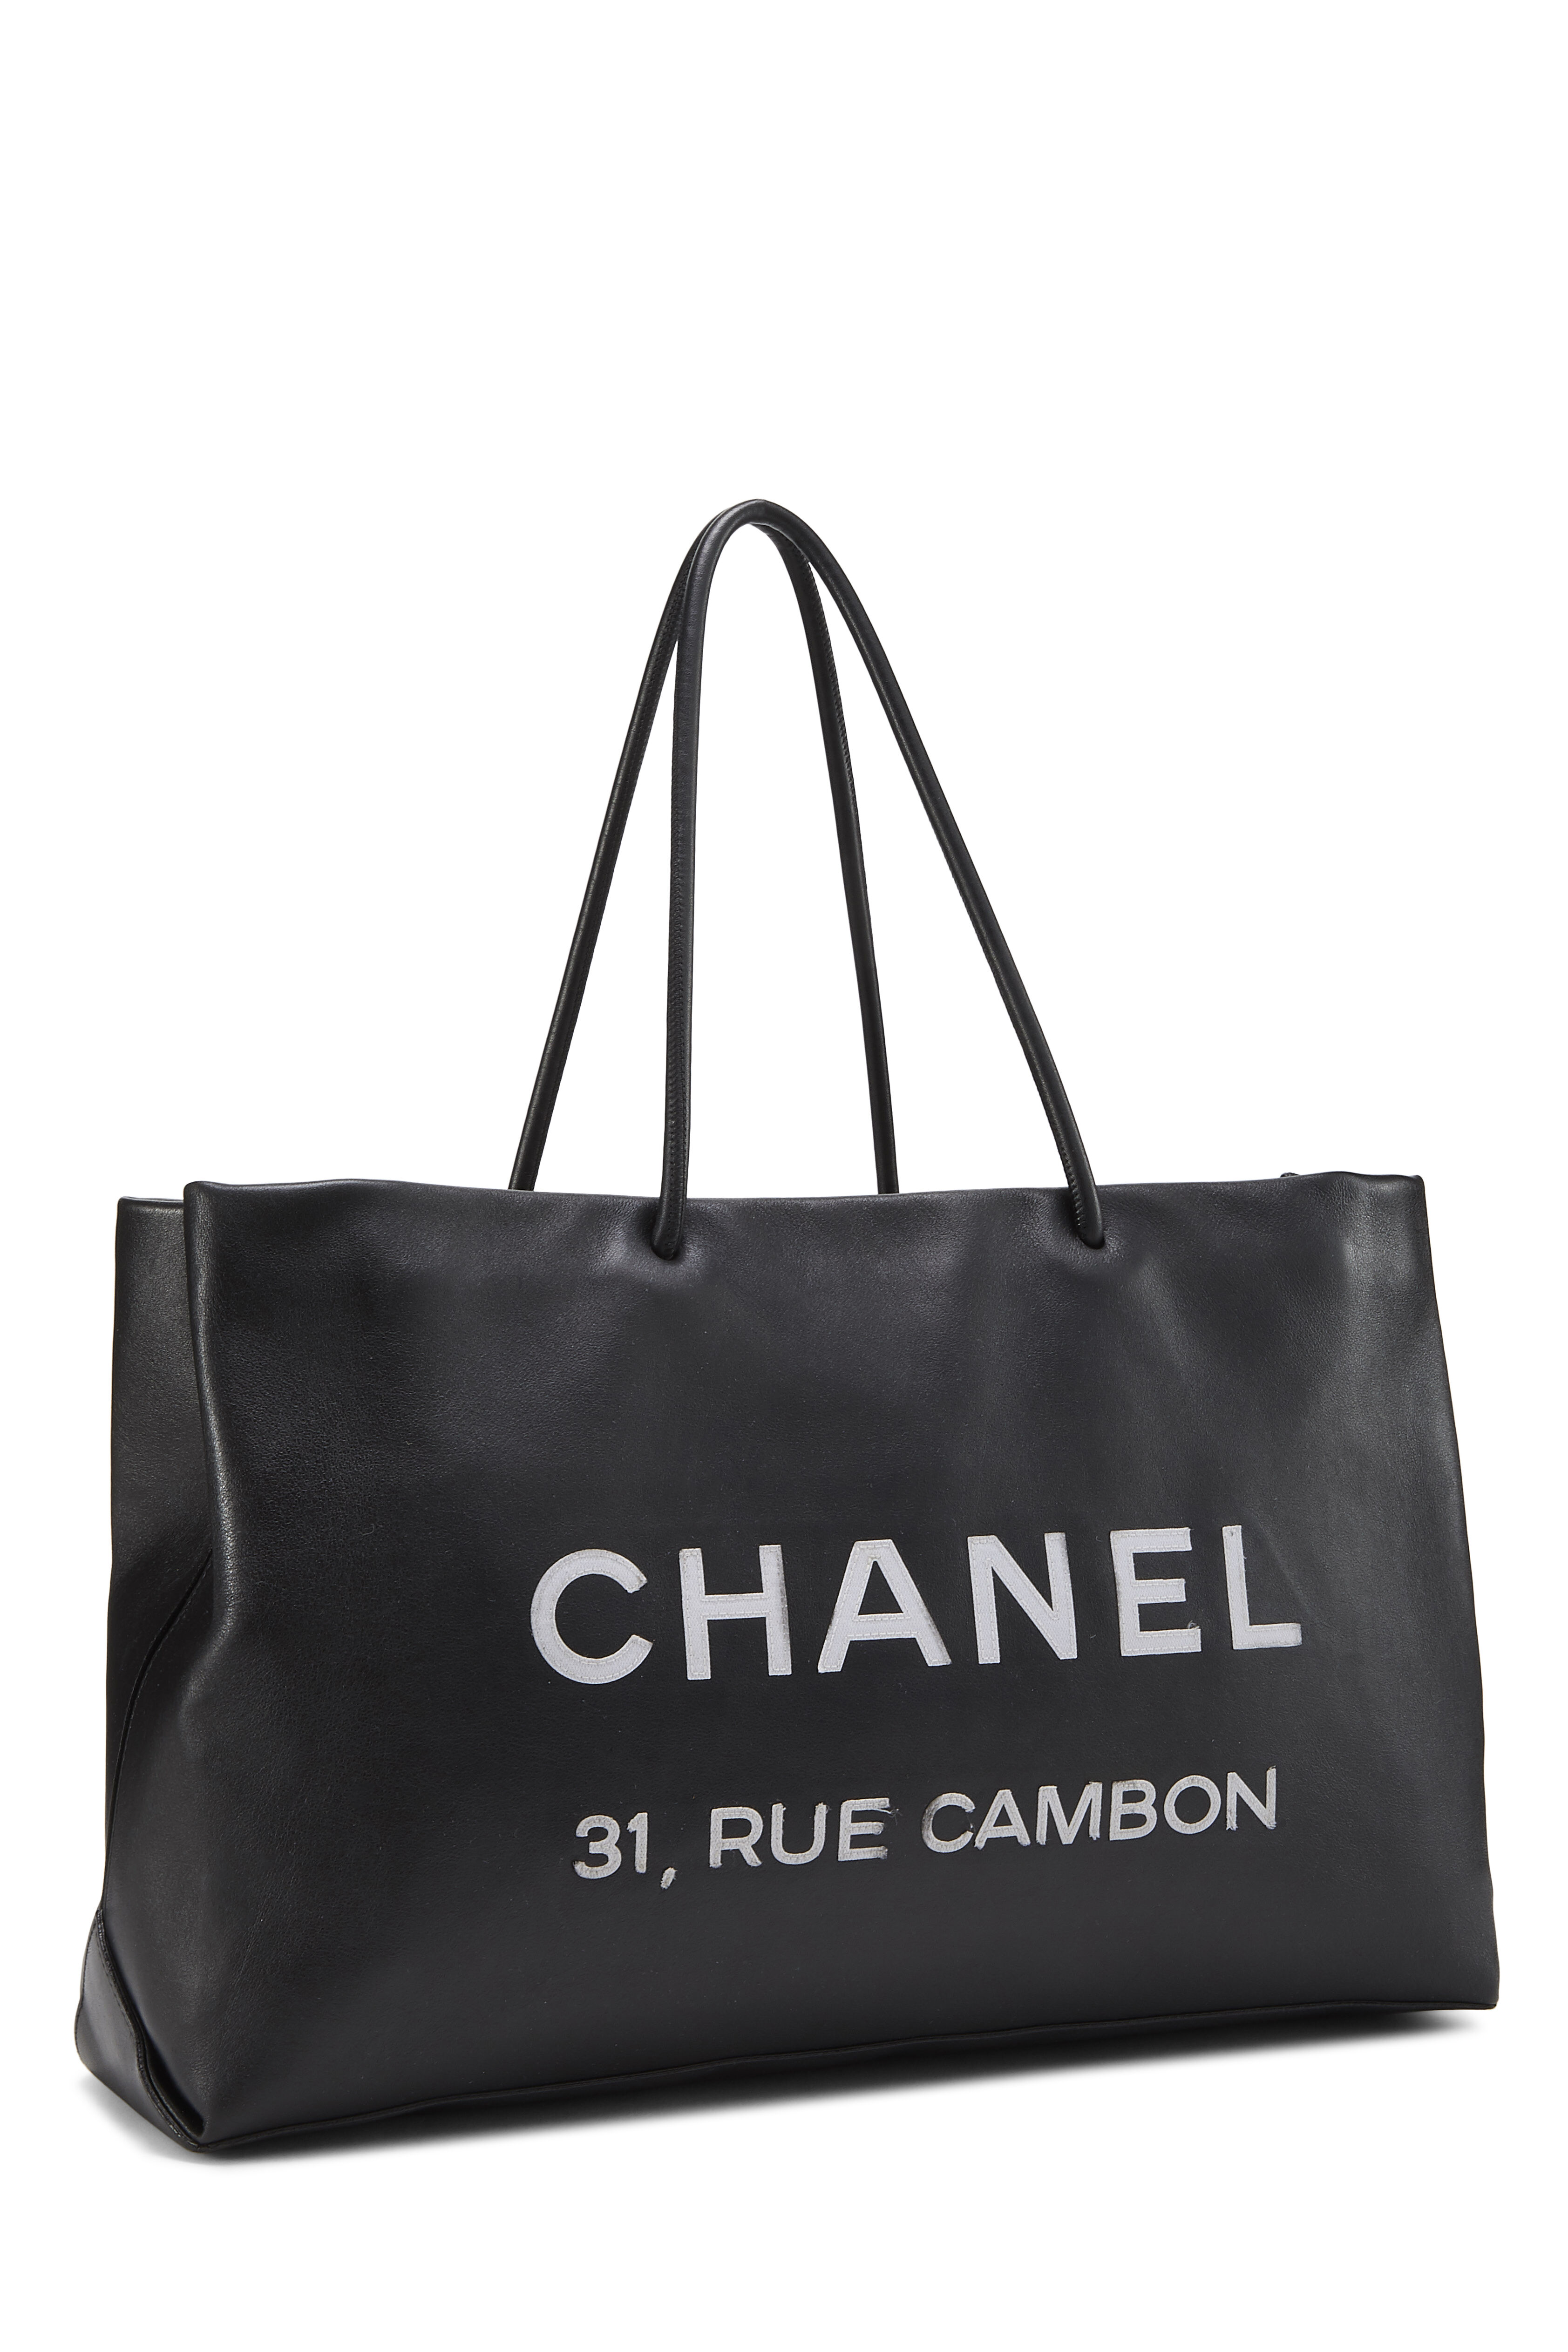 Chanel Pre-owned 2004-2005 Cambon Line Tote Bag - Black